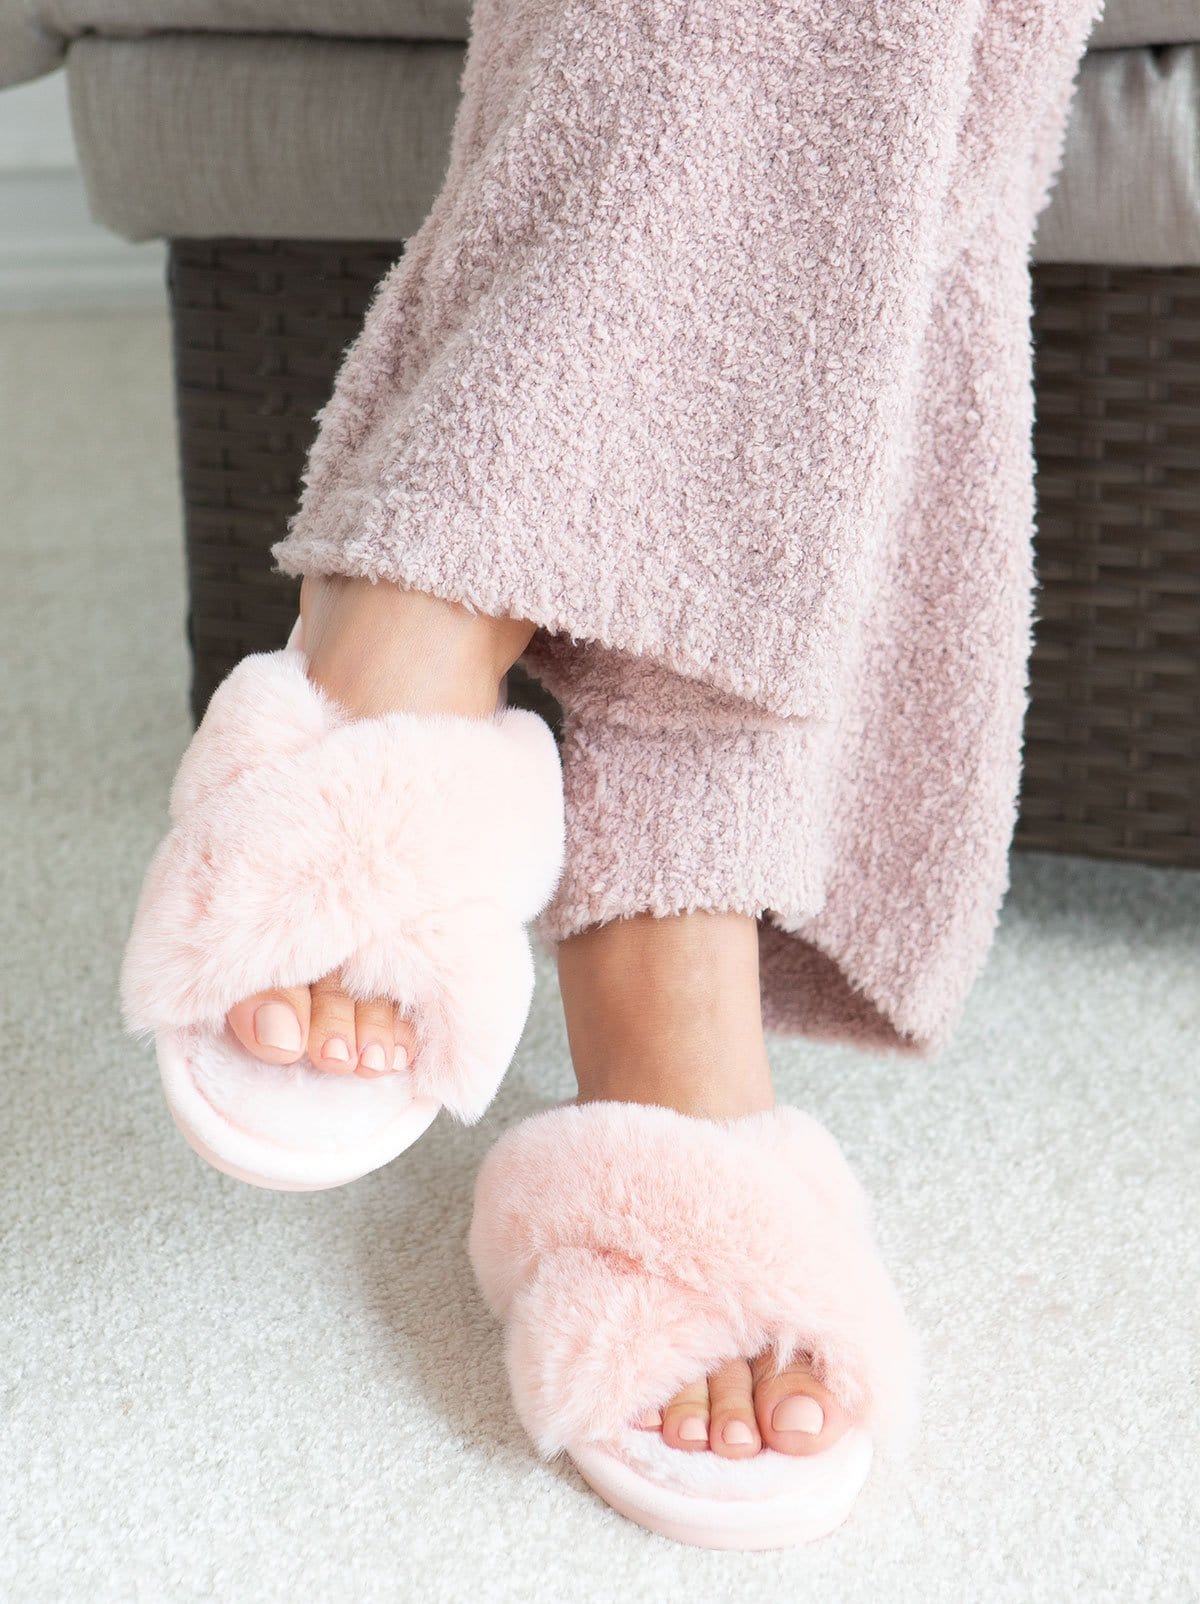 Image of Cozy Slippers